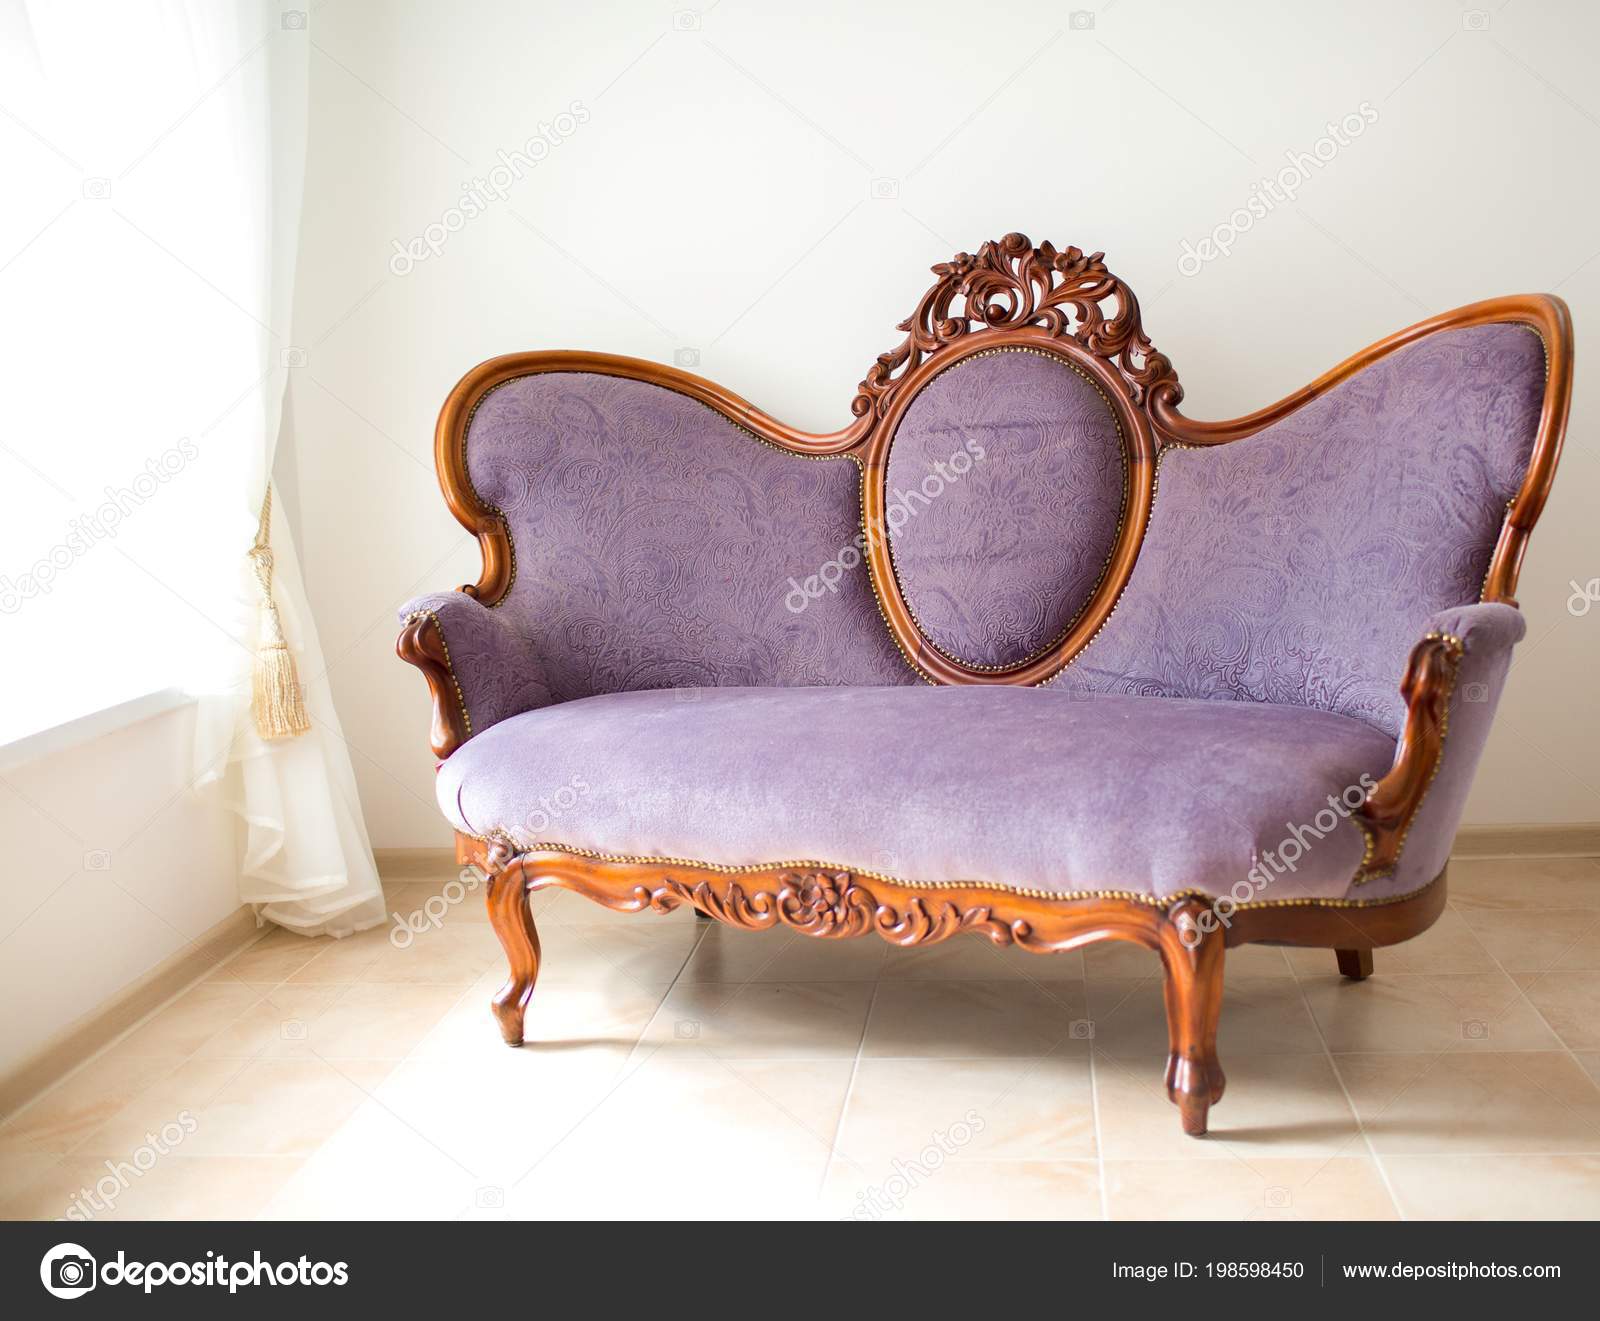 Classical Style Sofa Vintage Room Stock